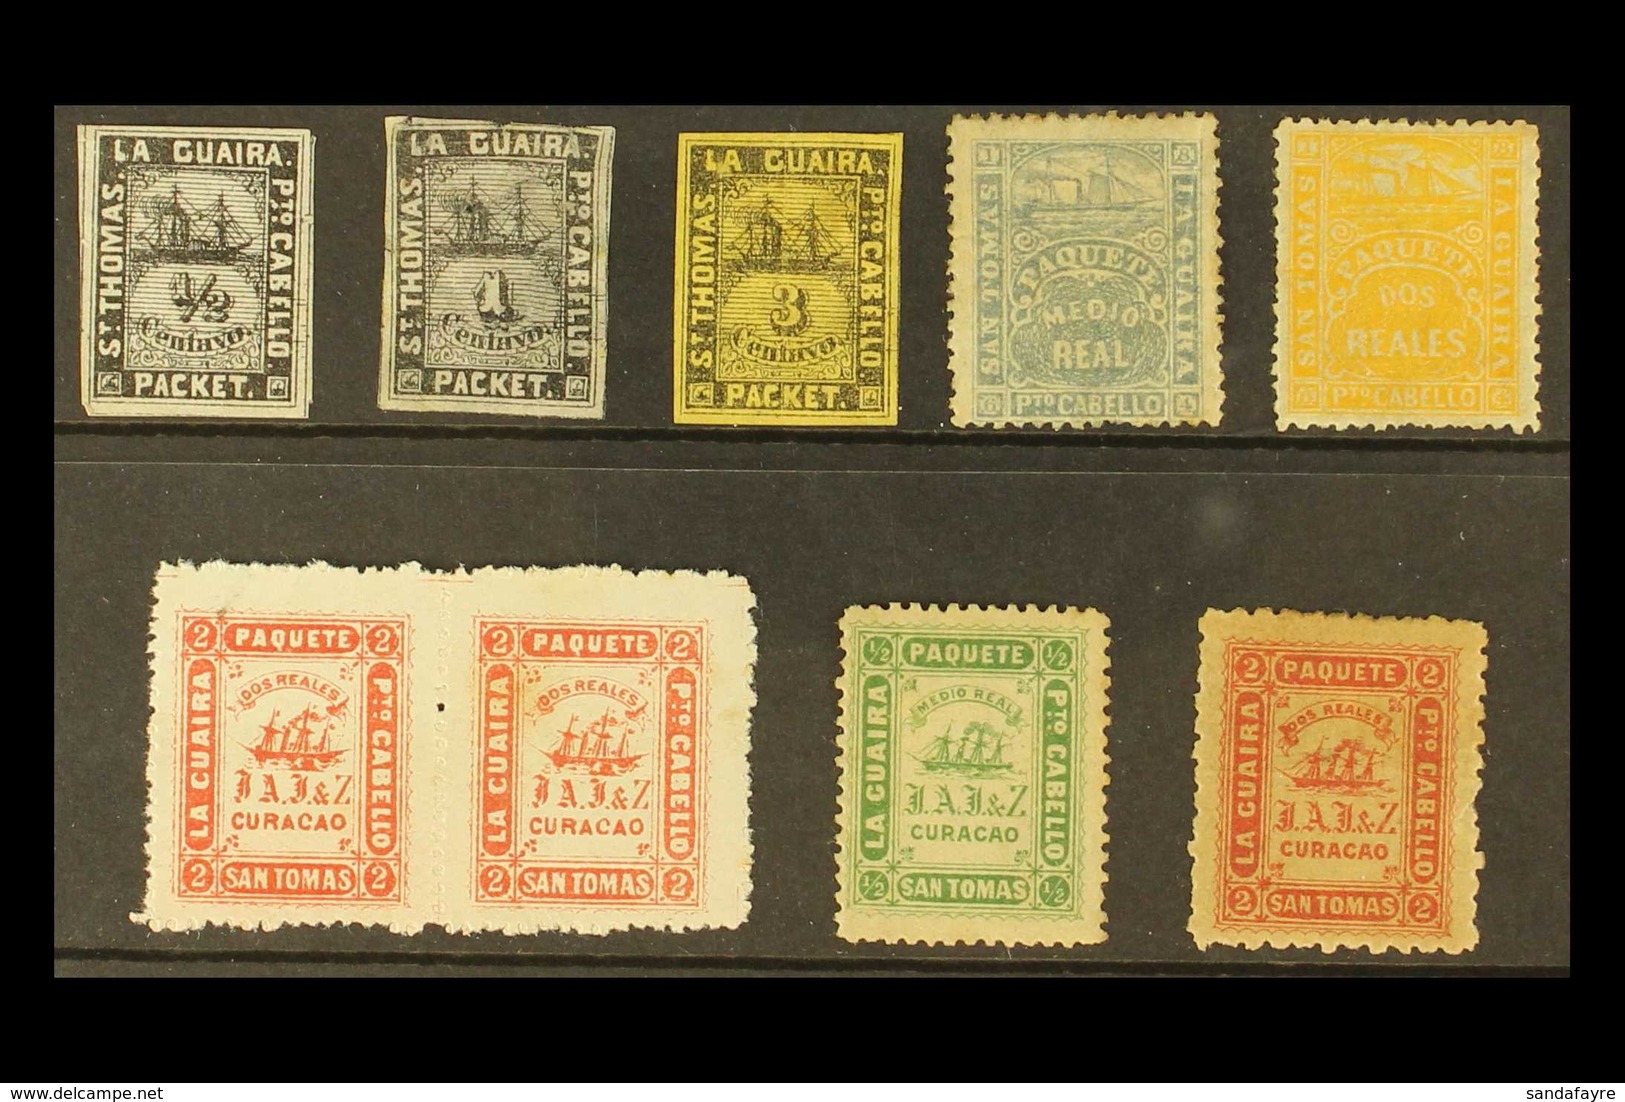 LA GUAIRA 1864-1868 Mint All Different Selection Of Steamship Company Local Stamps On A Stock Card, Mixed Condition As U - Venezuela